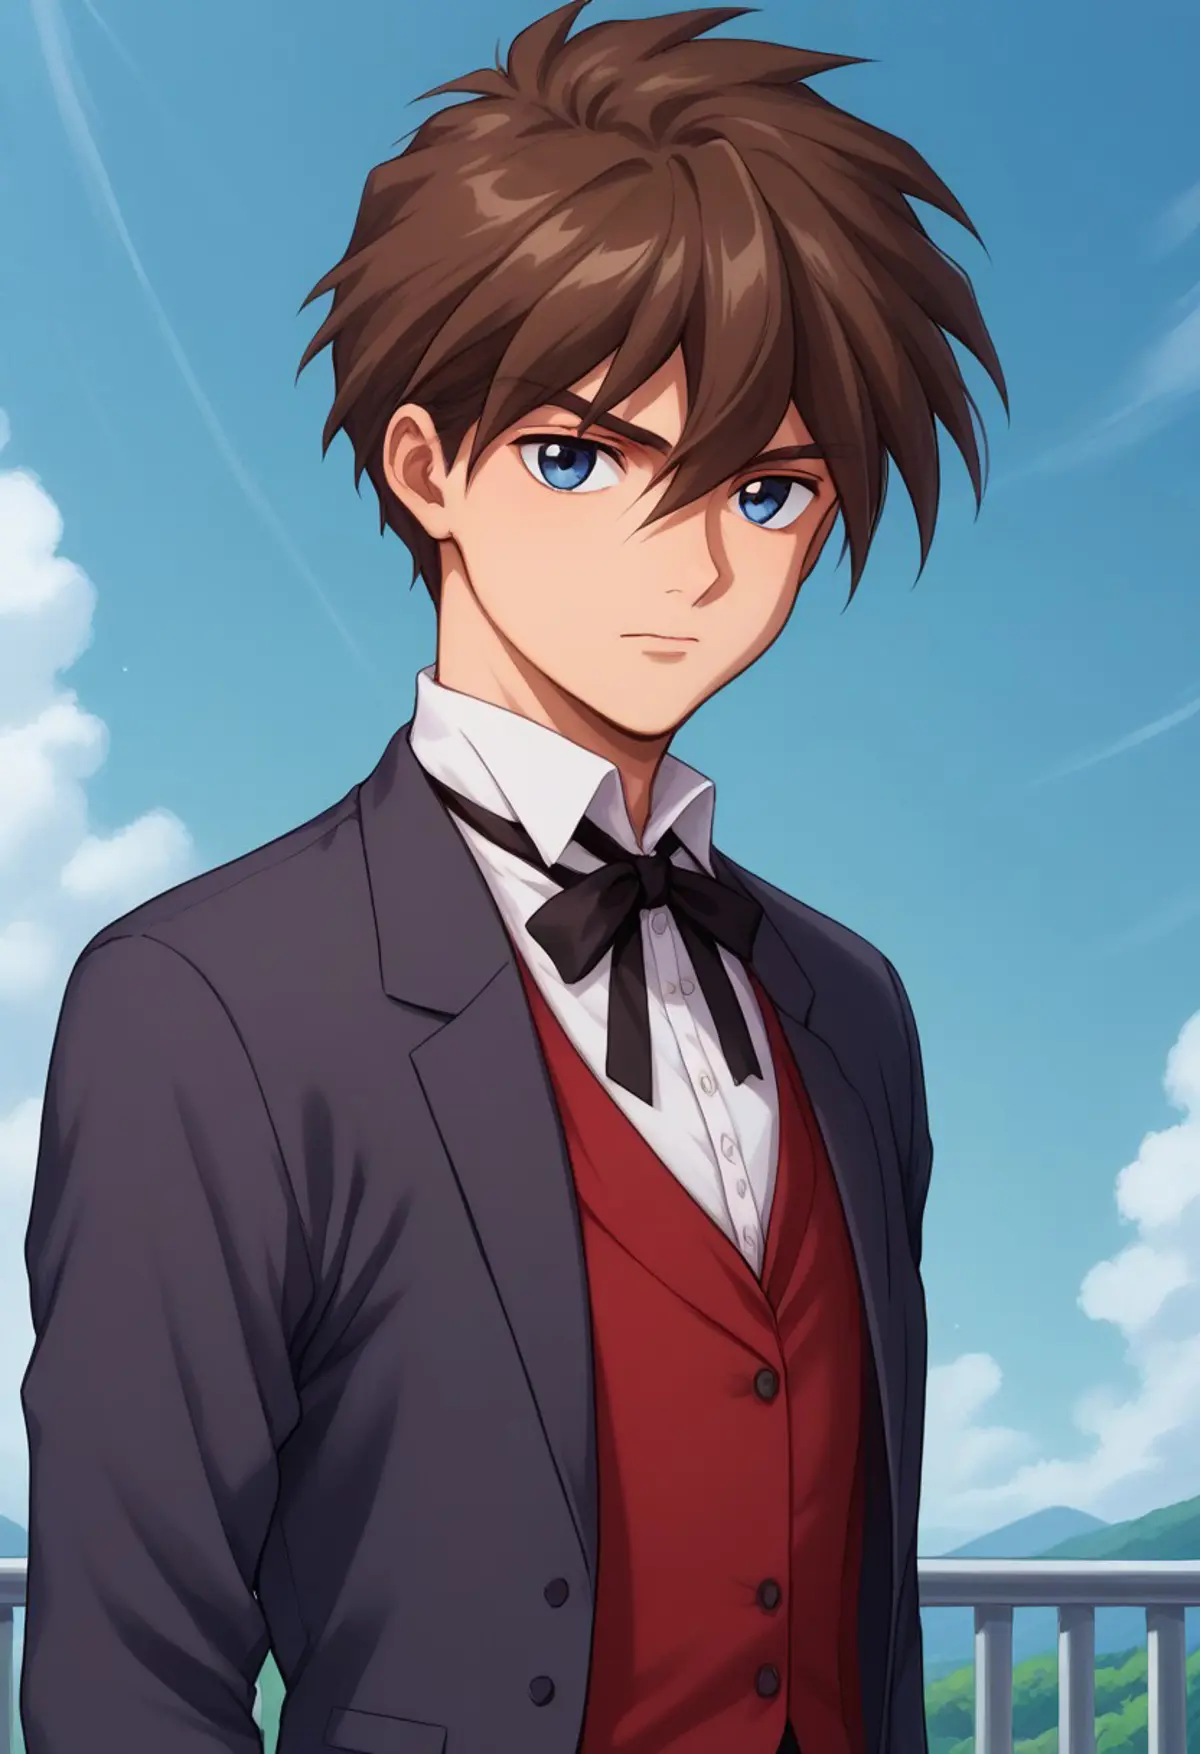 A boy with brown hair and blue eyes wearing a formal dark suit with a red vest and black bowtie looking directly at the viewer. In the background, there is a clear blue sky with some clouds and what appears to be the top of a white railing.